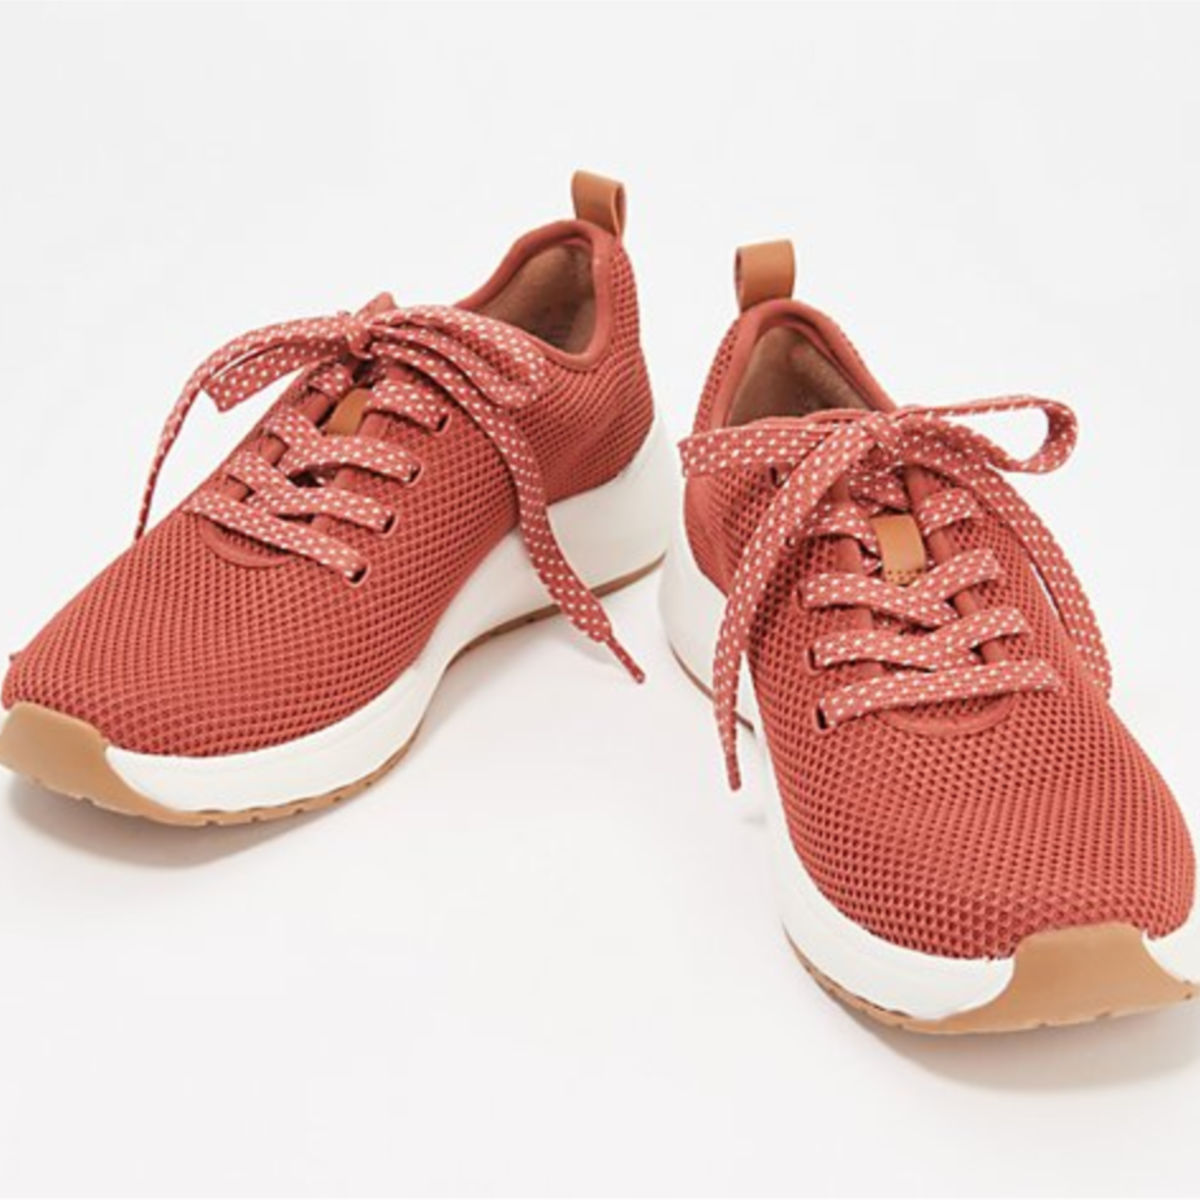 Dr. Scholl's High Hopes Lace-Up Knit Sneakers